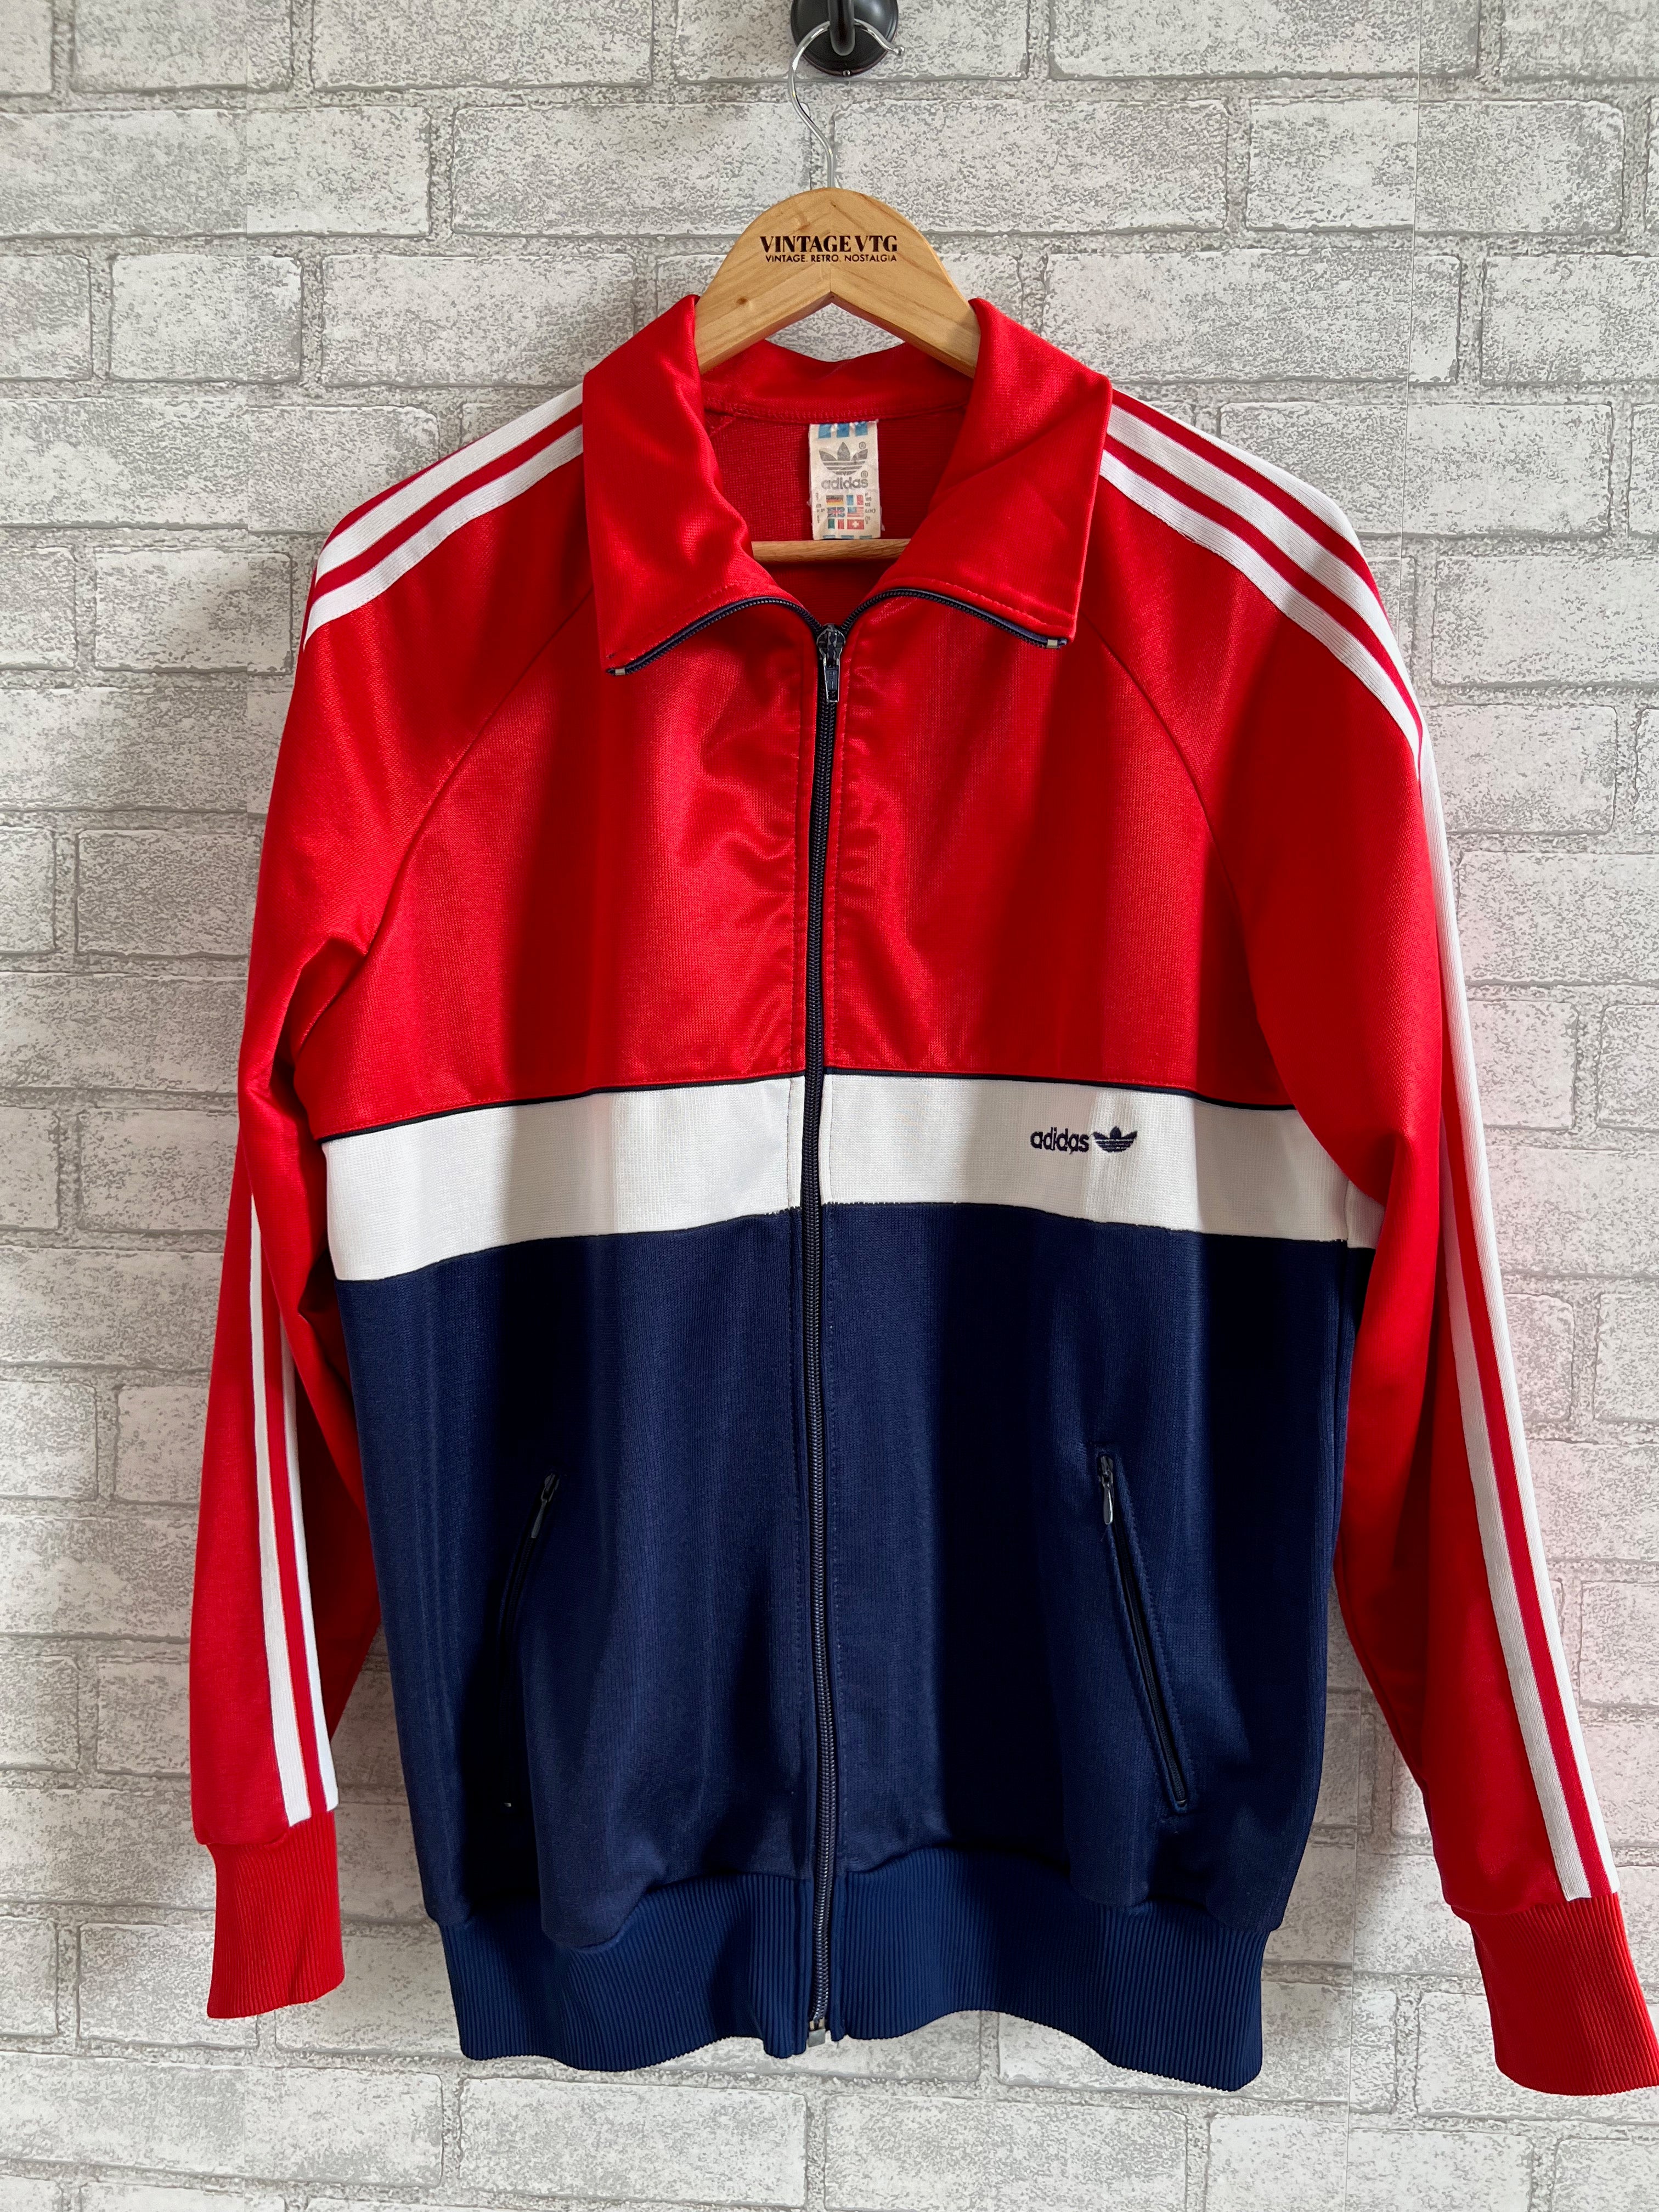 Vintage 80's 90's Adidas Track Jacket. Red, Blue and white